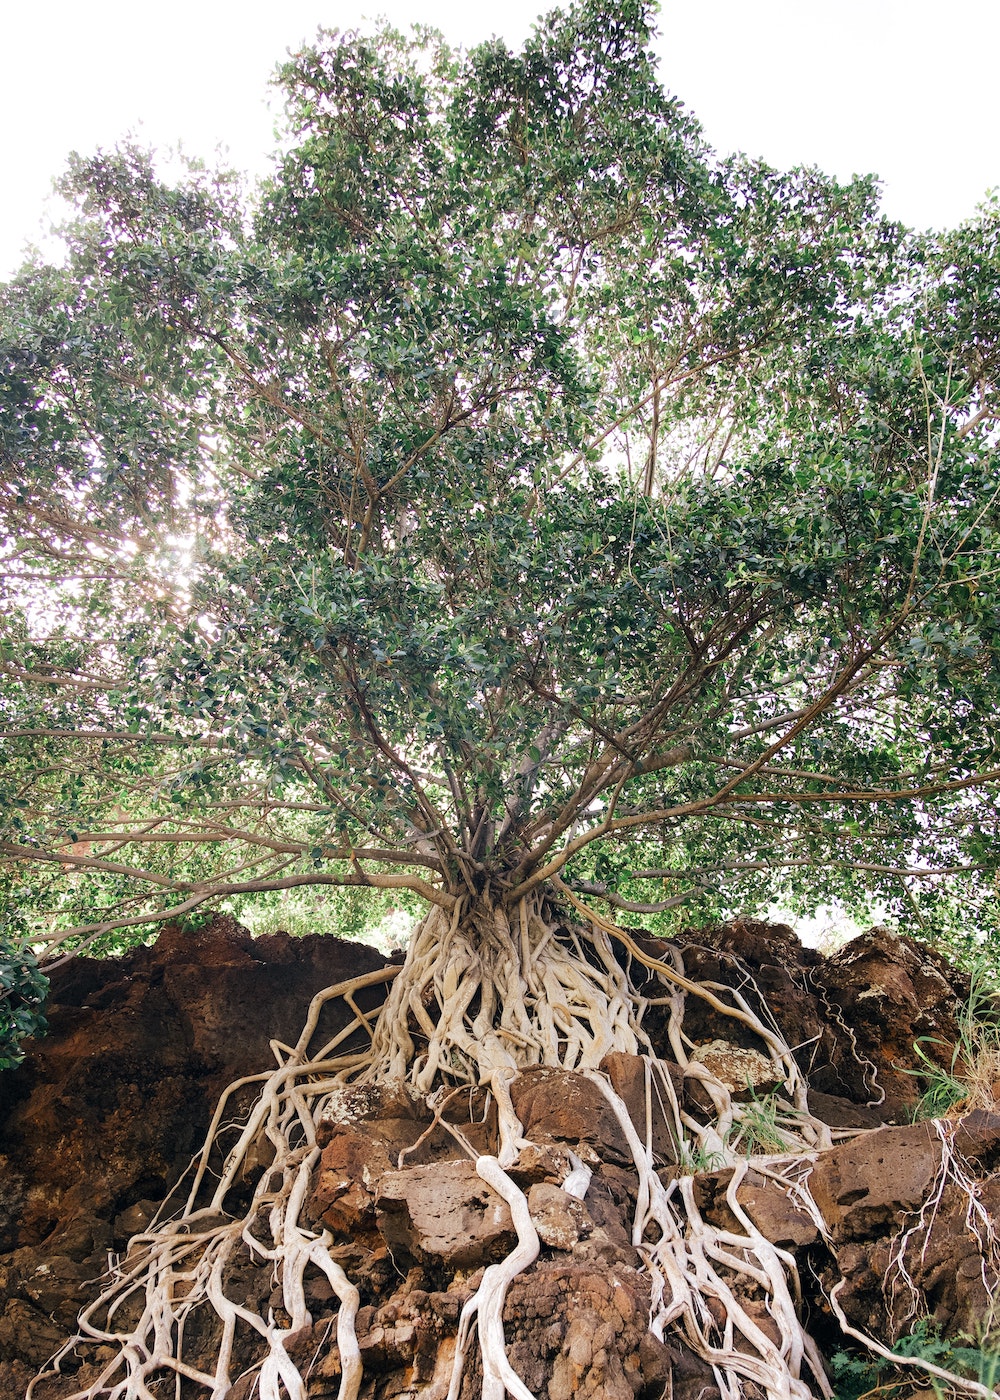 View is of a tree from below a rock ledge with roots exposed and draping over large boulders. The tree branches are lit from behind.